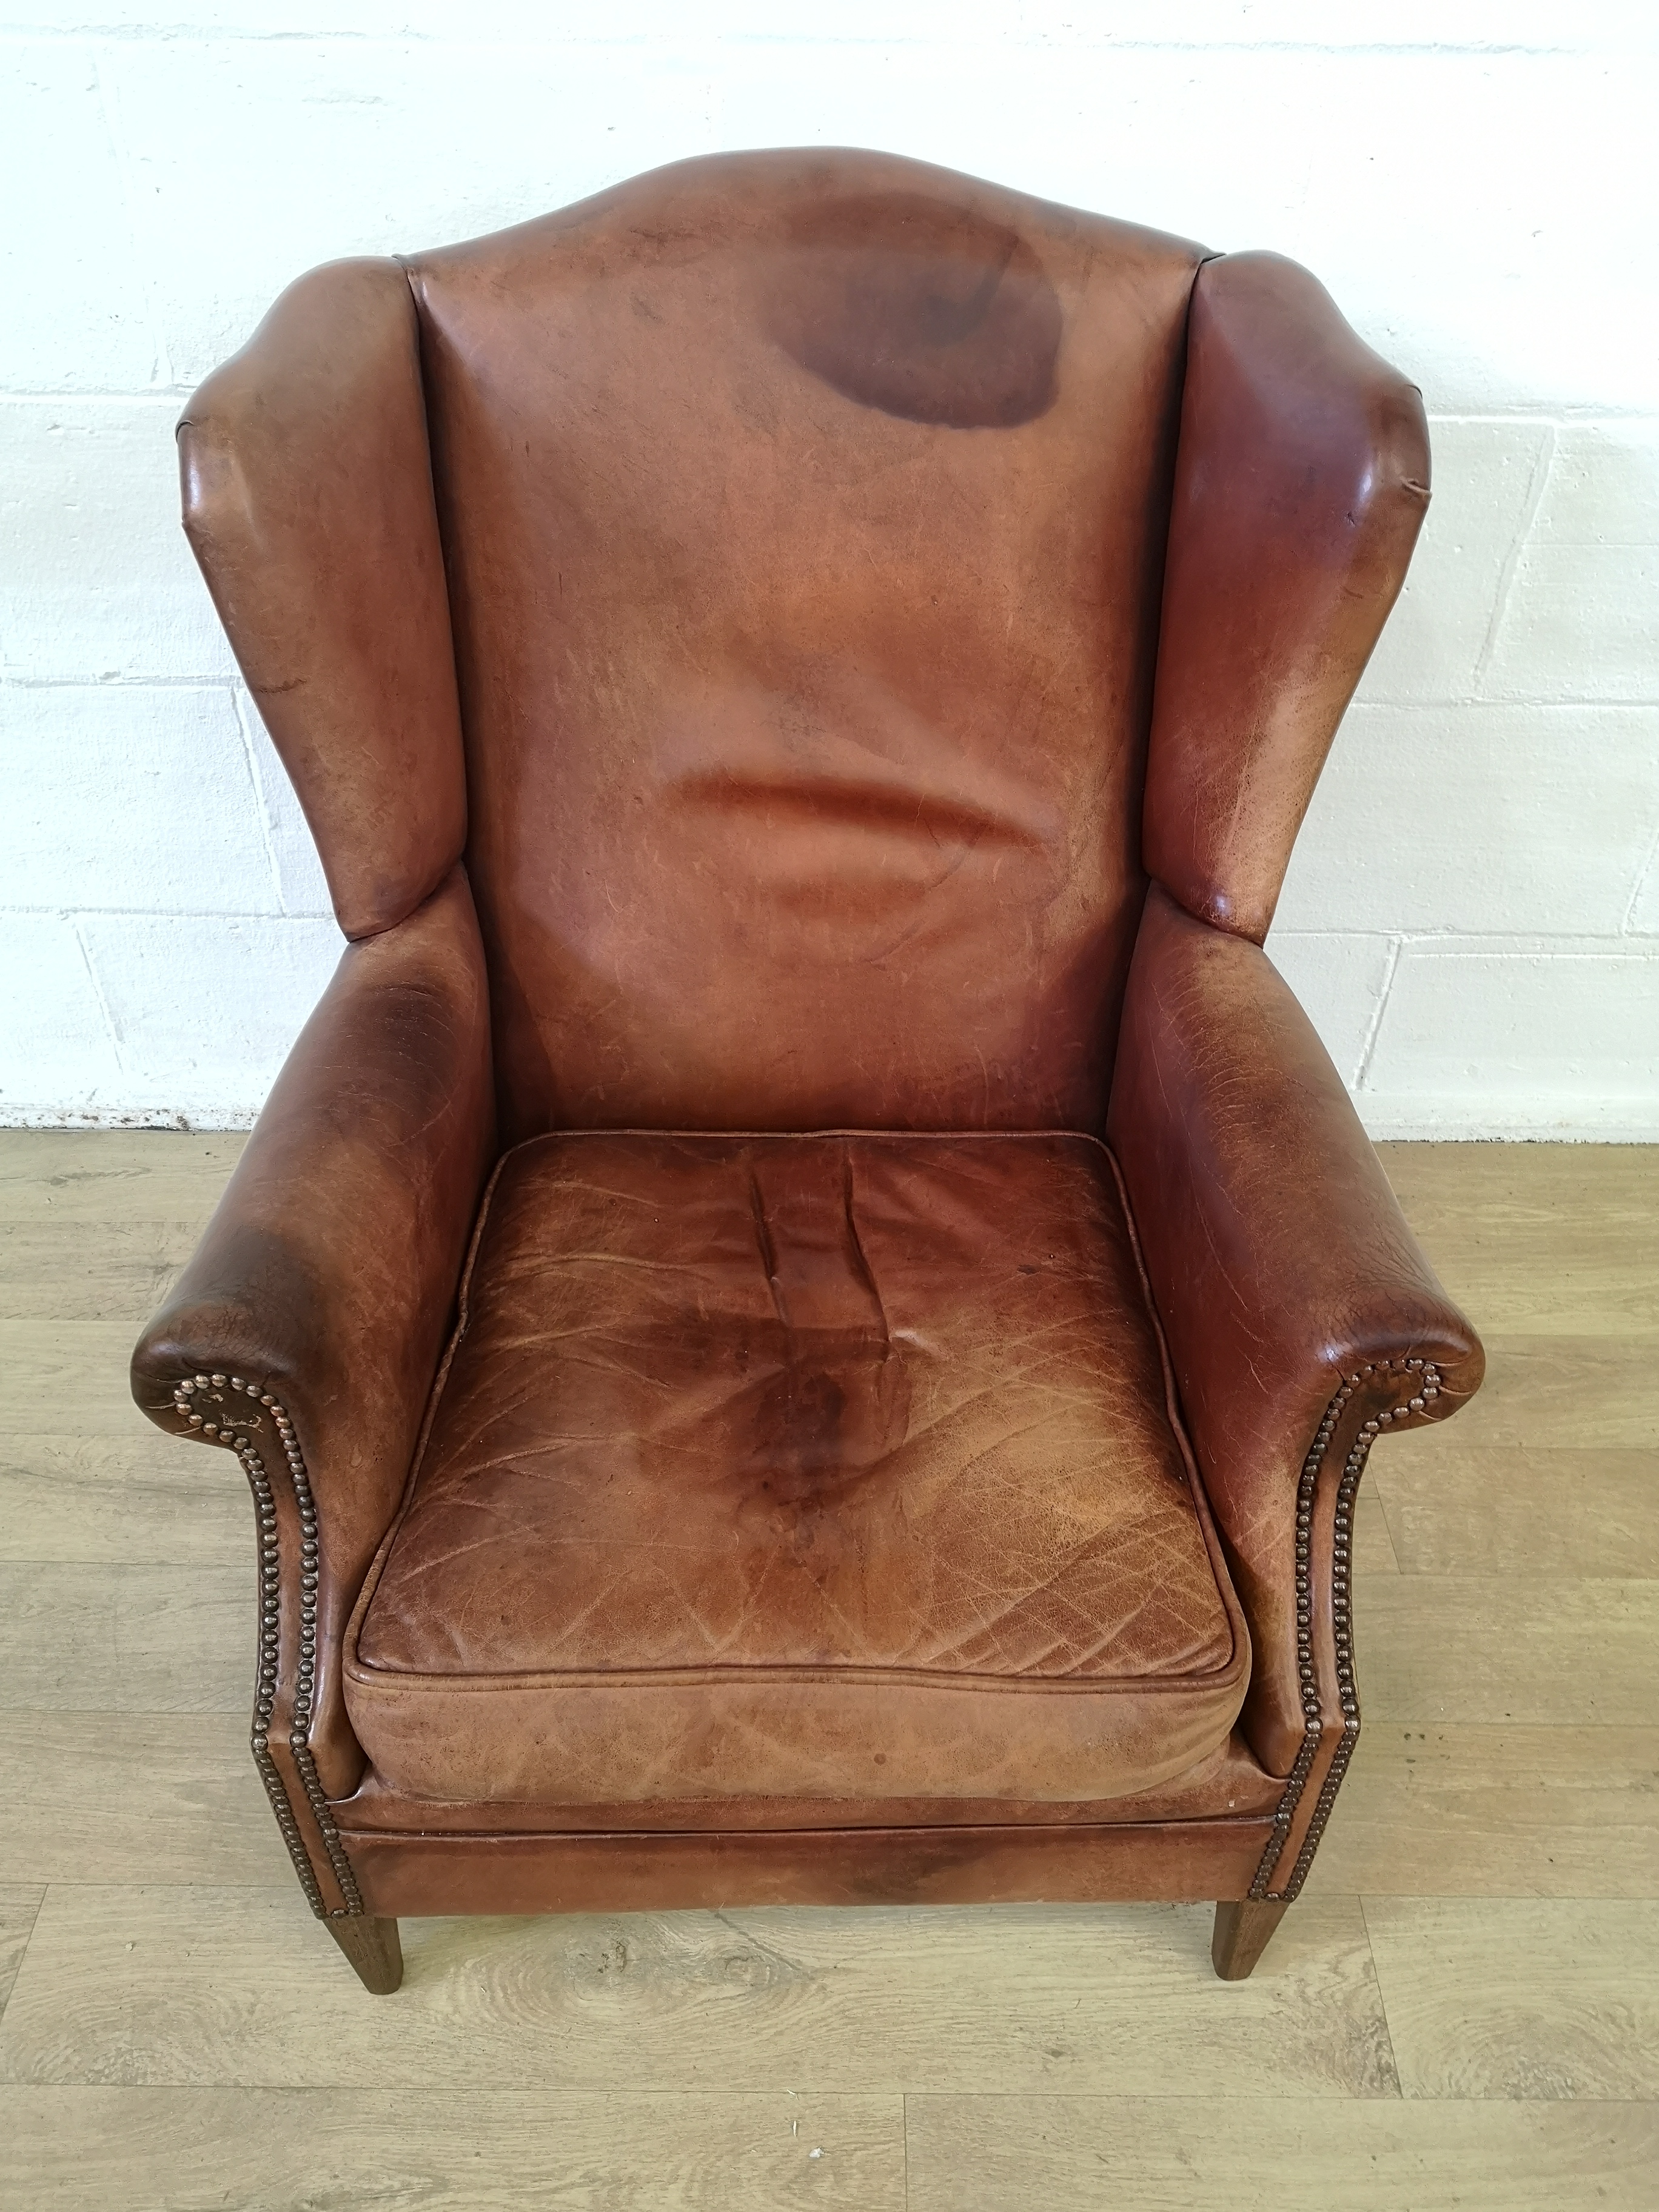 Leather style wingback armchair - Image 2 of 6